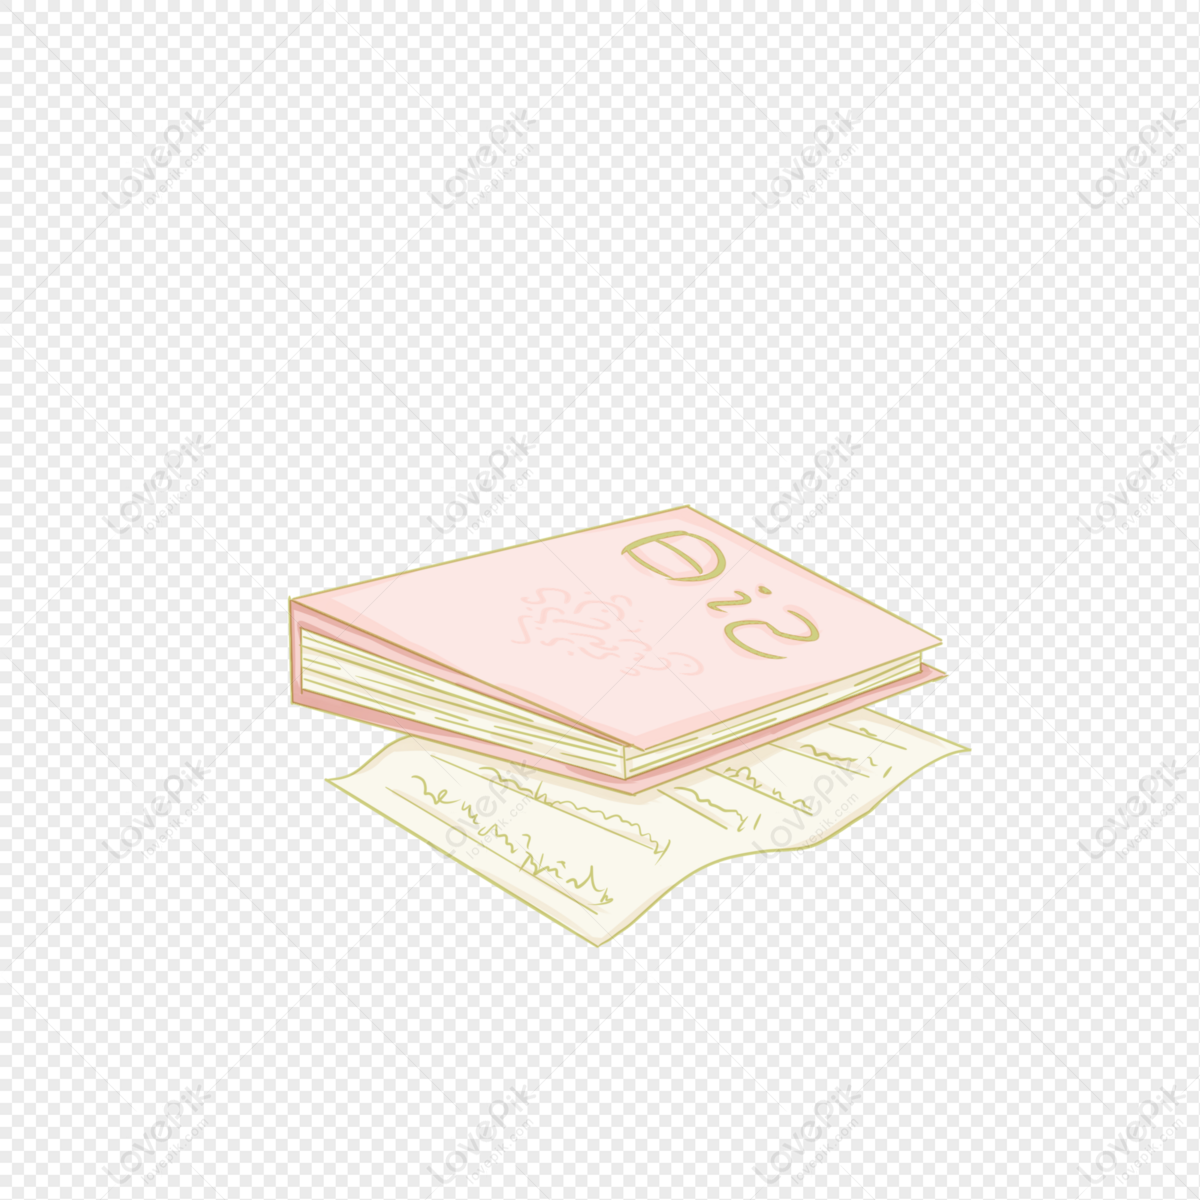 Journal Clipart Images, Free Download